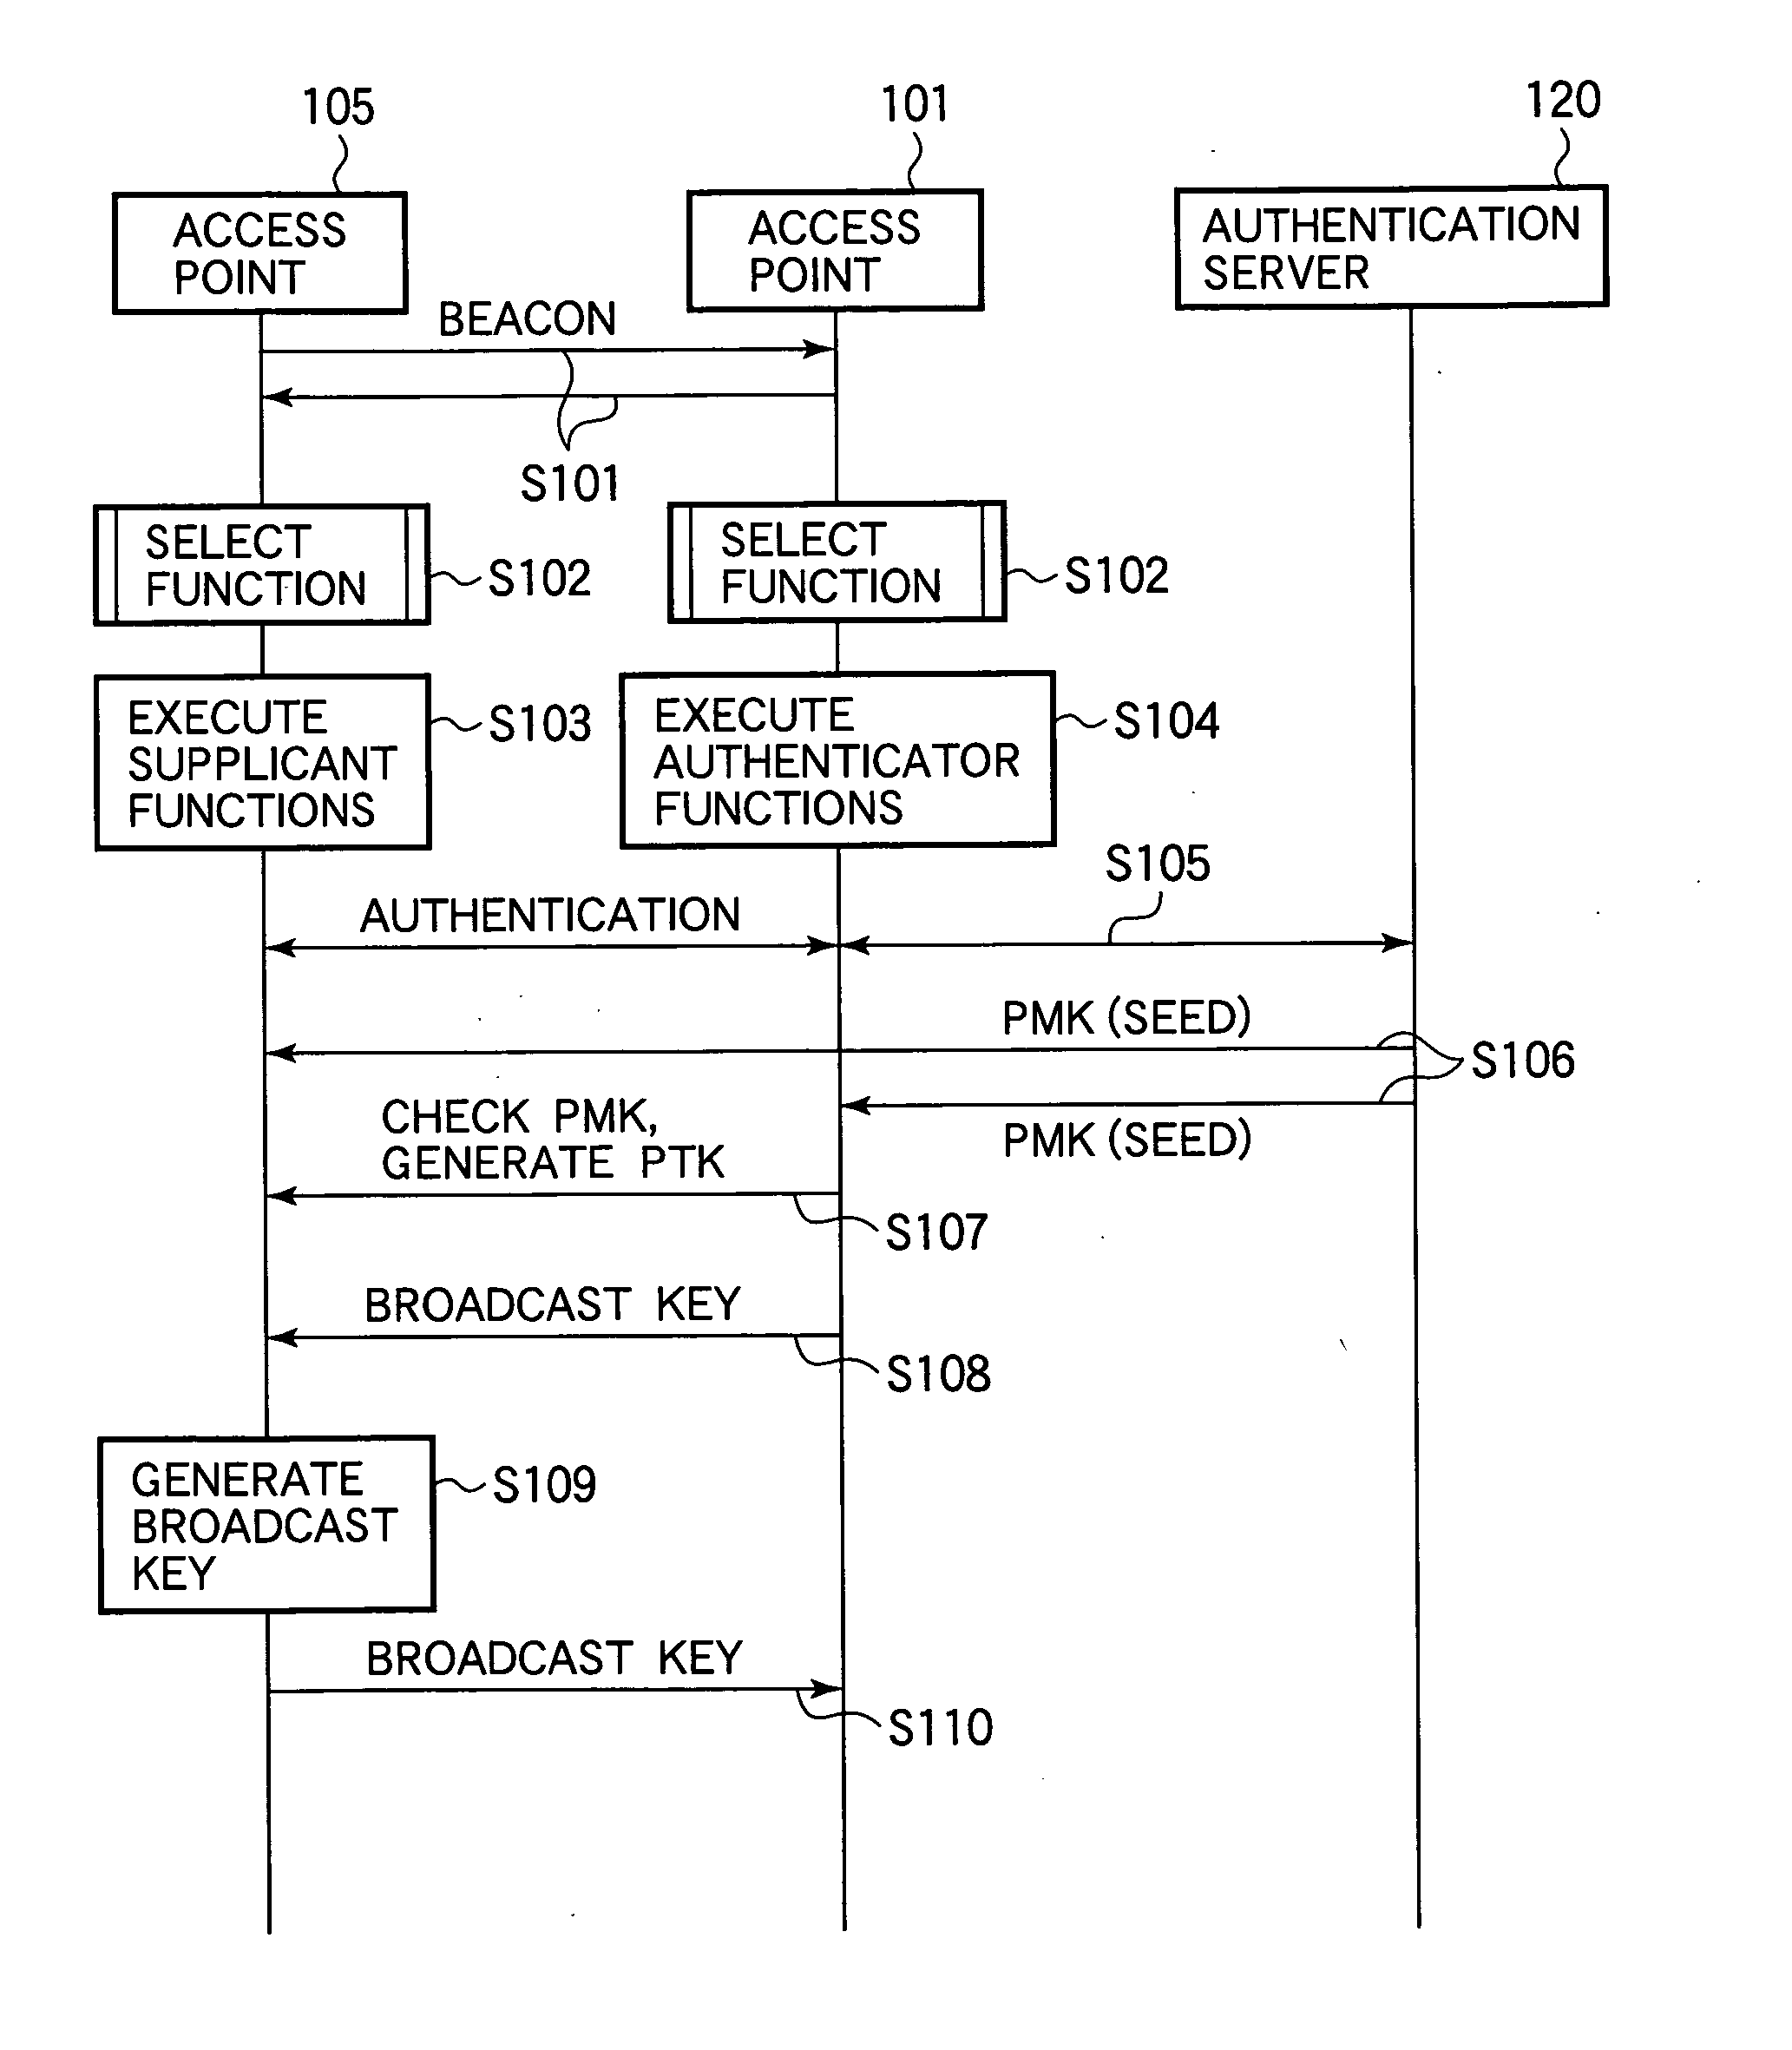 Wireless access point apparatus and method of establishing secure wireless links